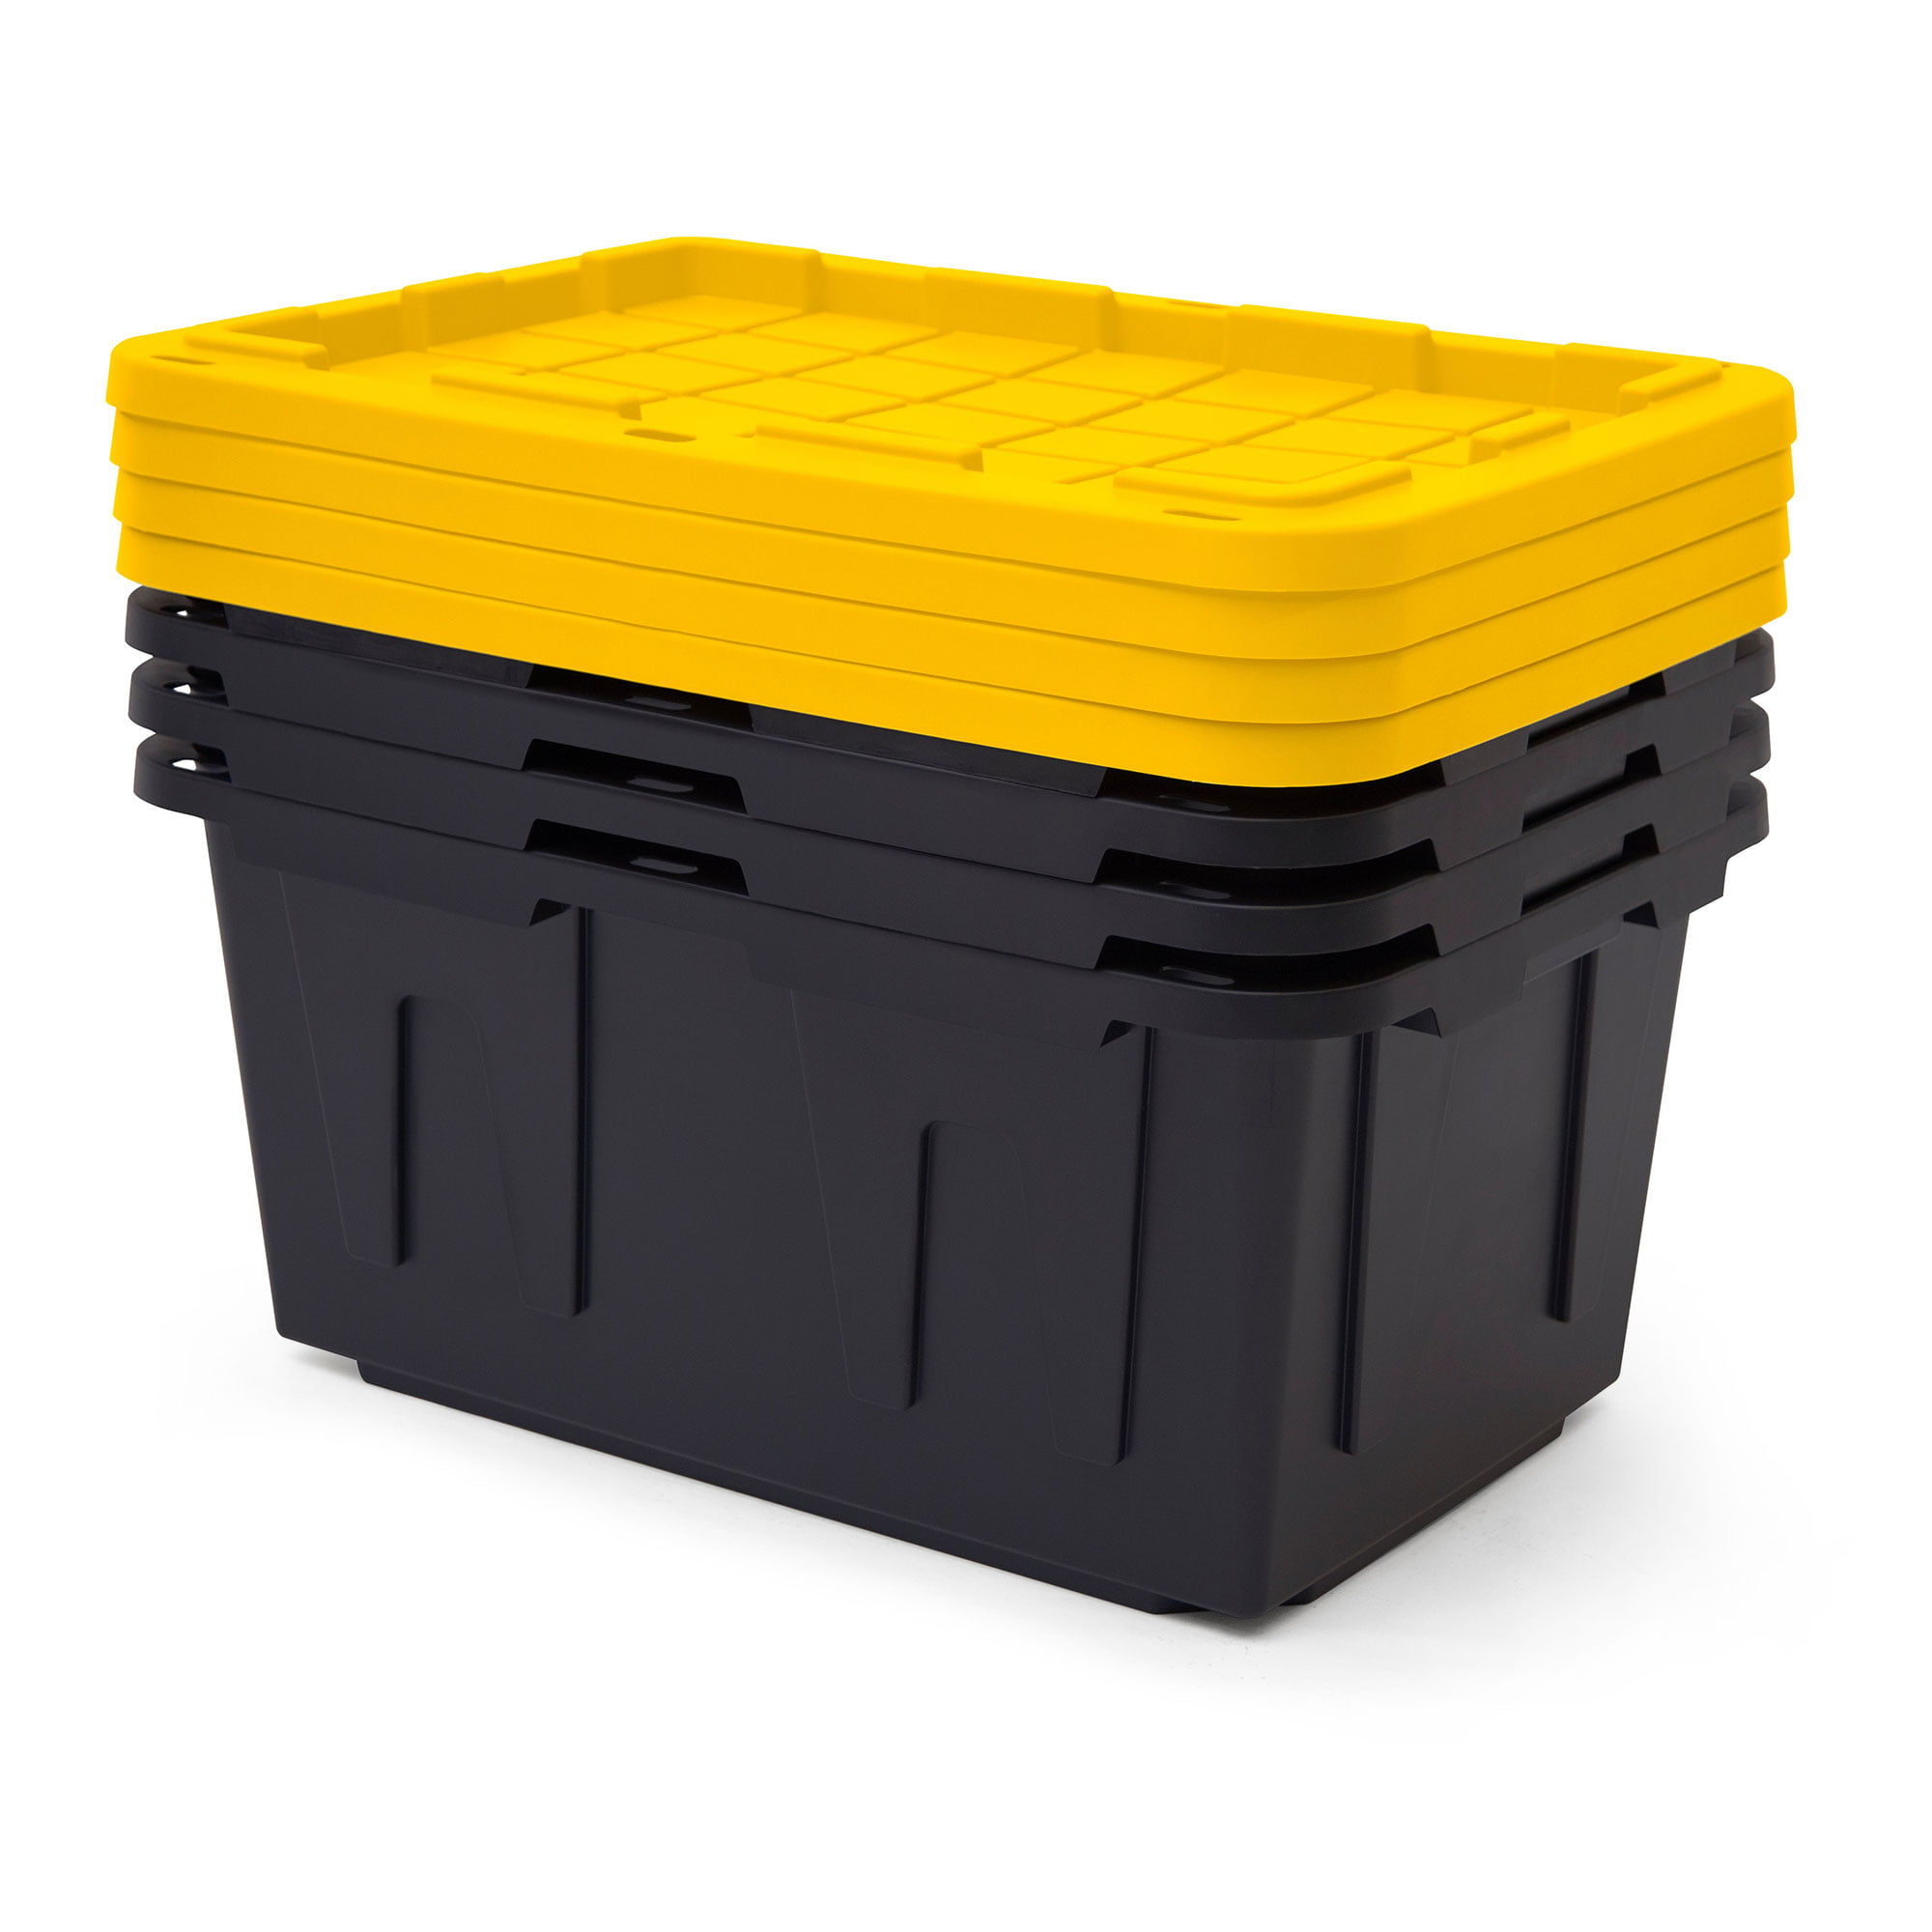 Chicken Pieces Stackable Strong Tote Bin, Plastic Organizer Box, Black Base & Yellow Snap-On Lid 64L (6/Case)